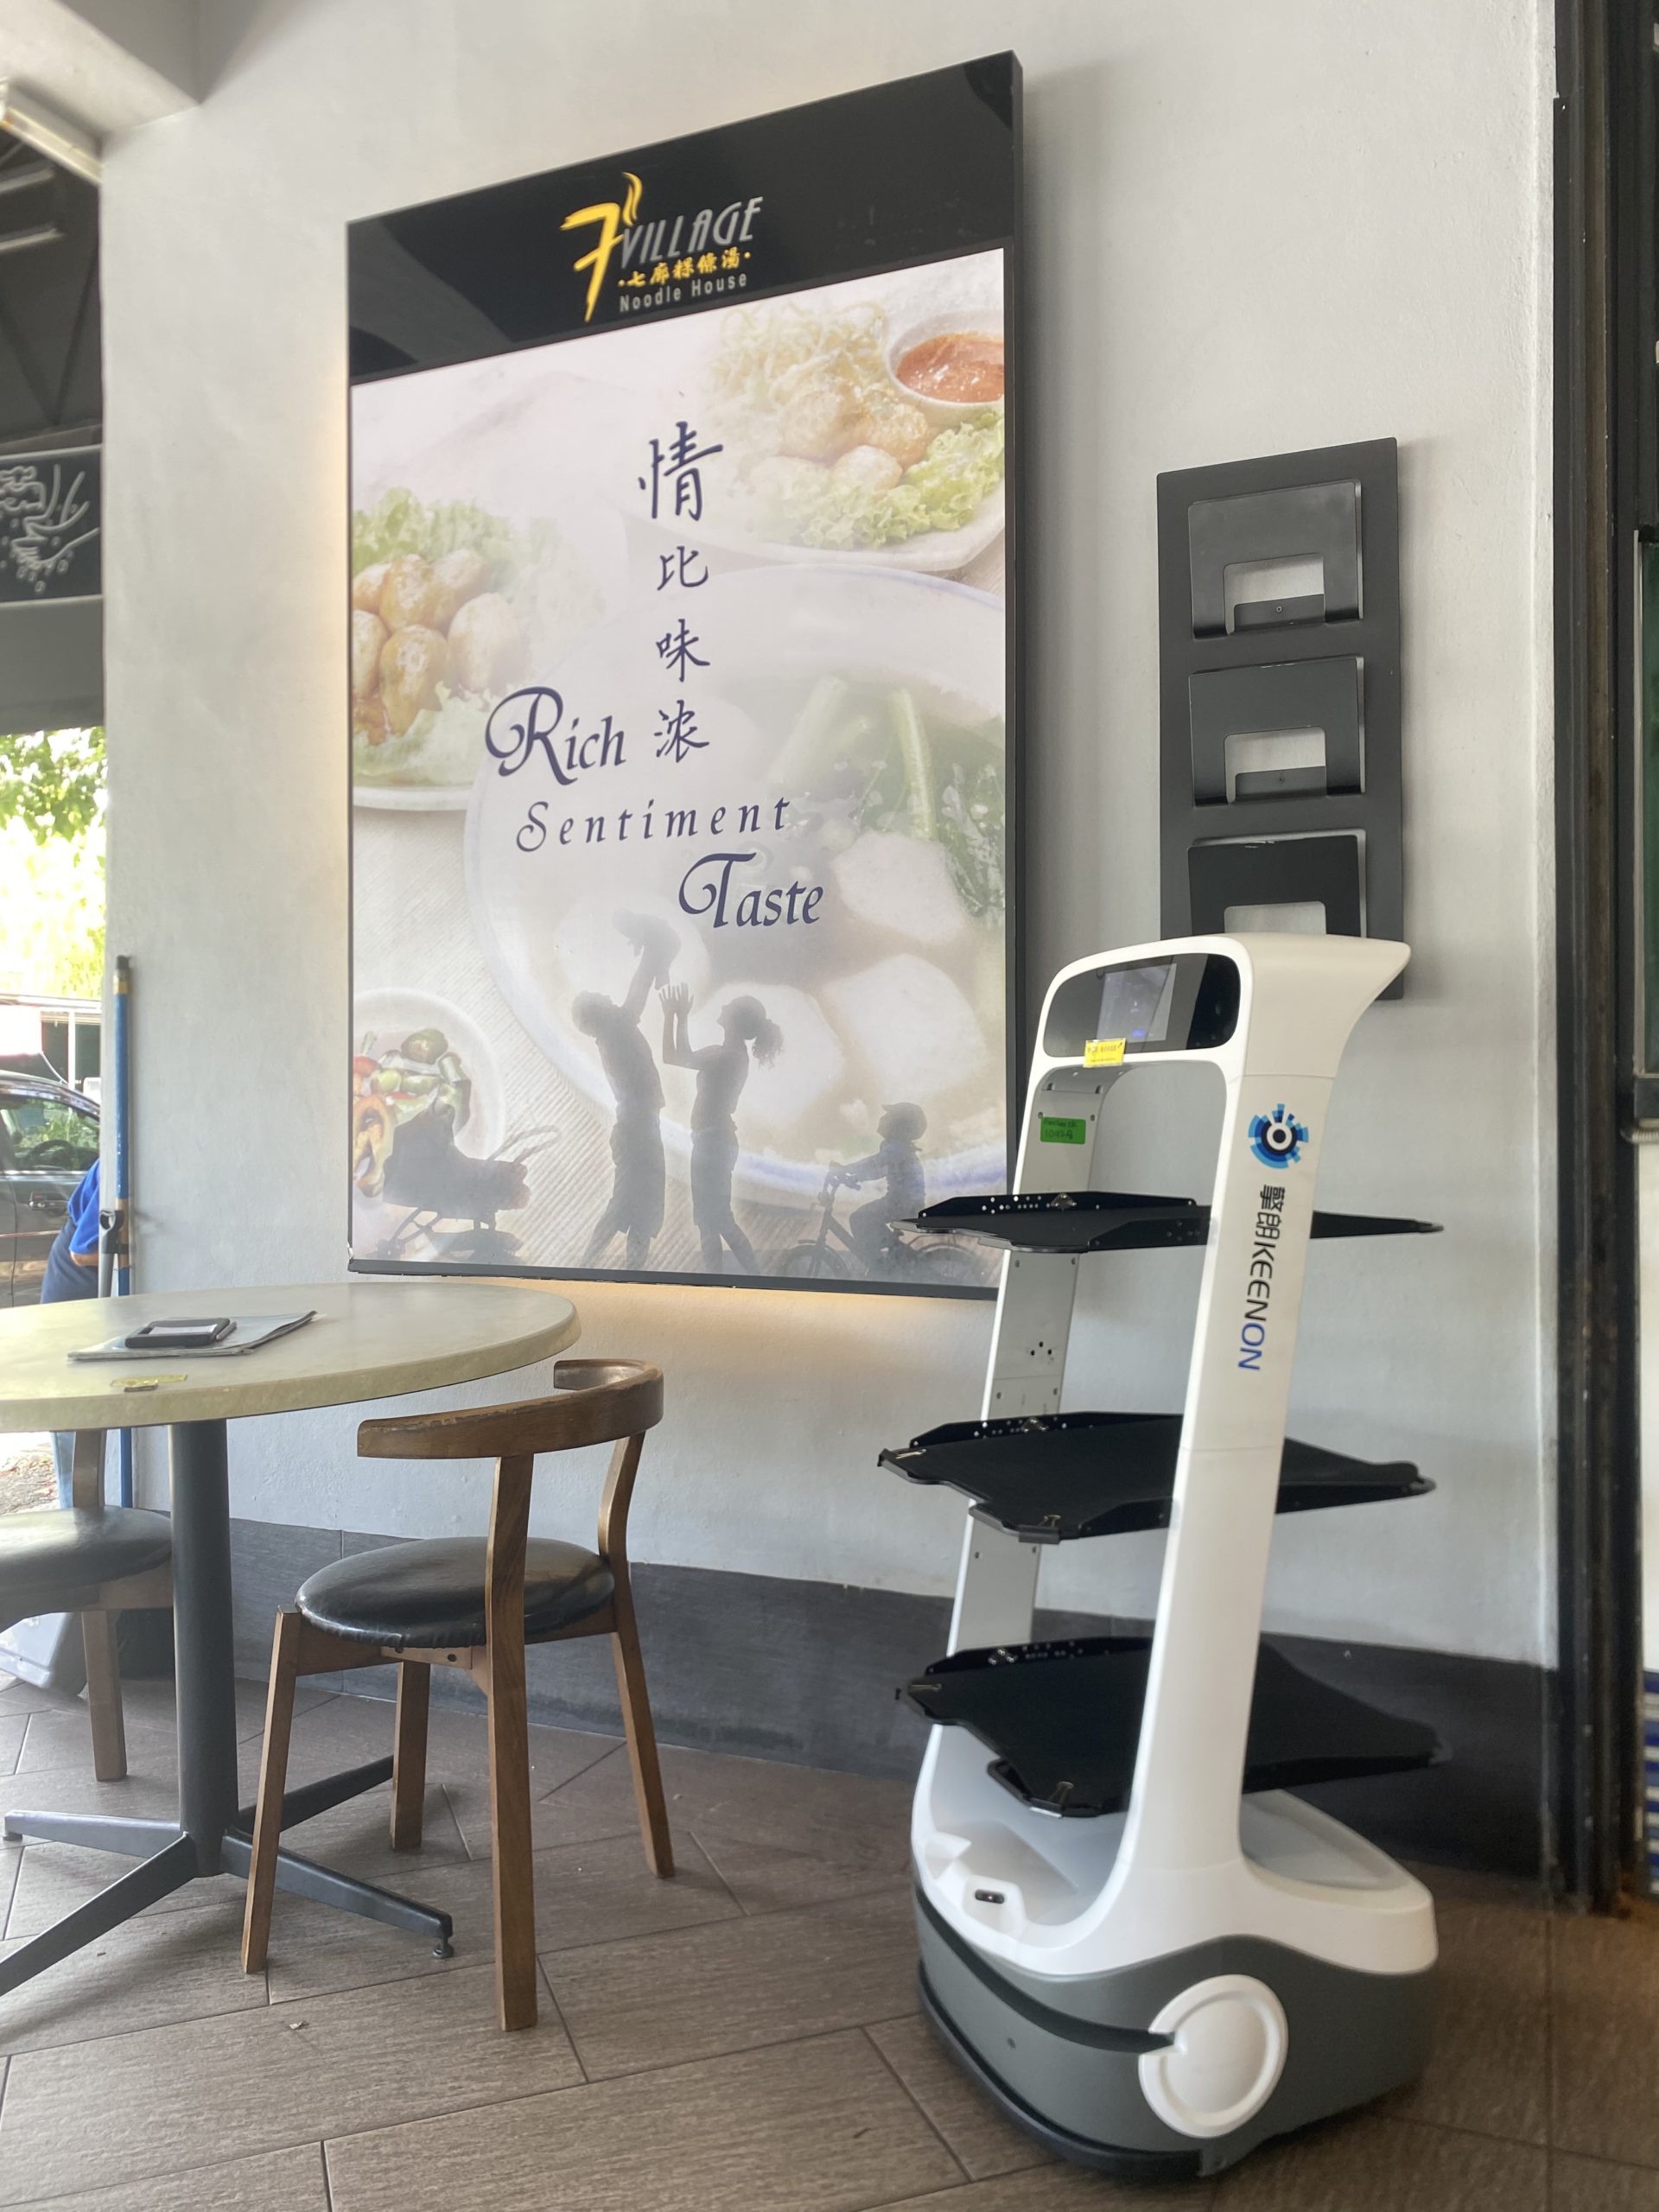 Solutions: Food Delivery Robot